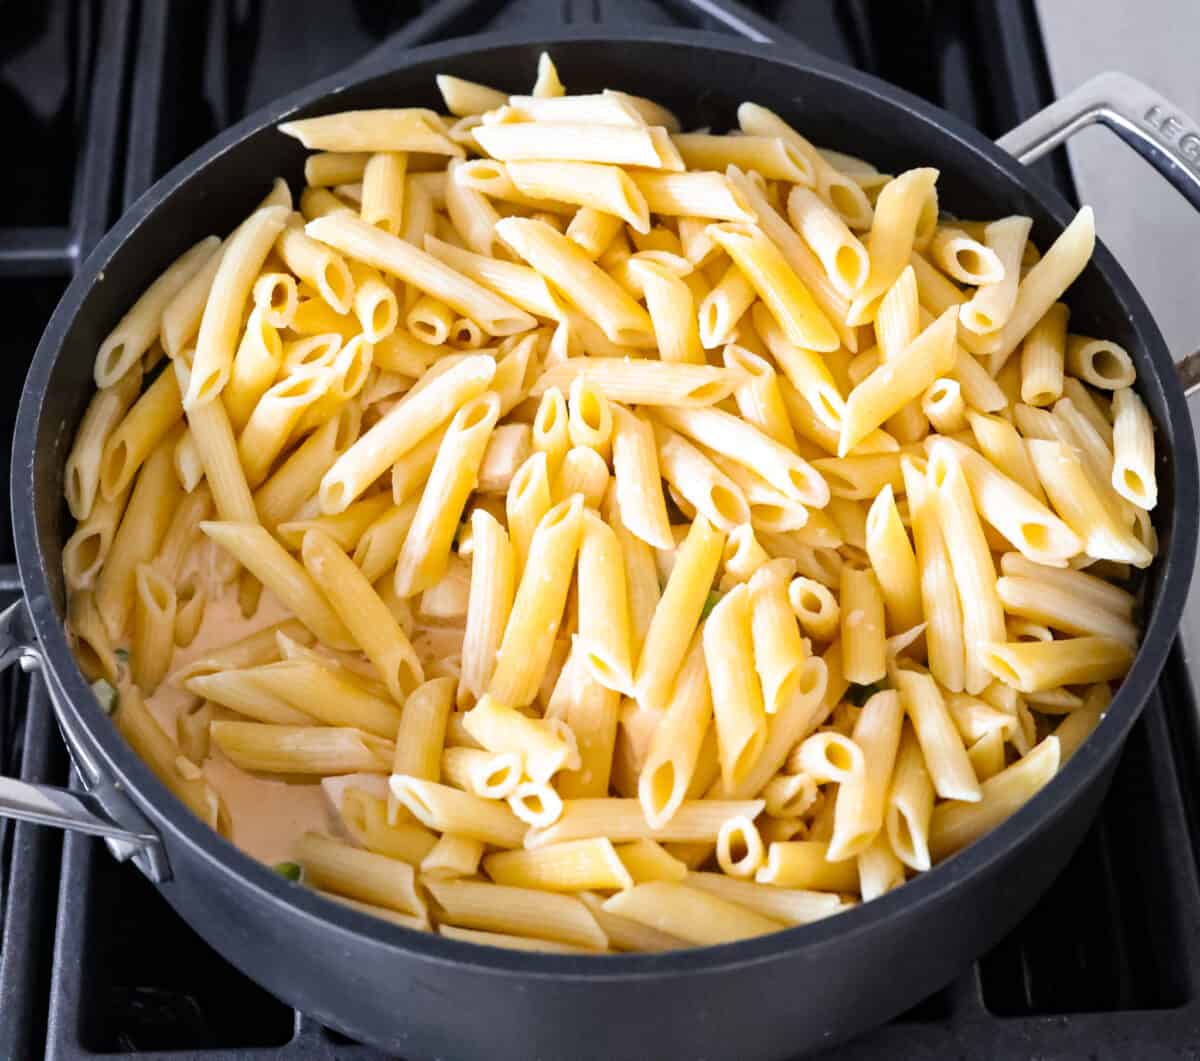 Stirring in the cooked penne pasta.